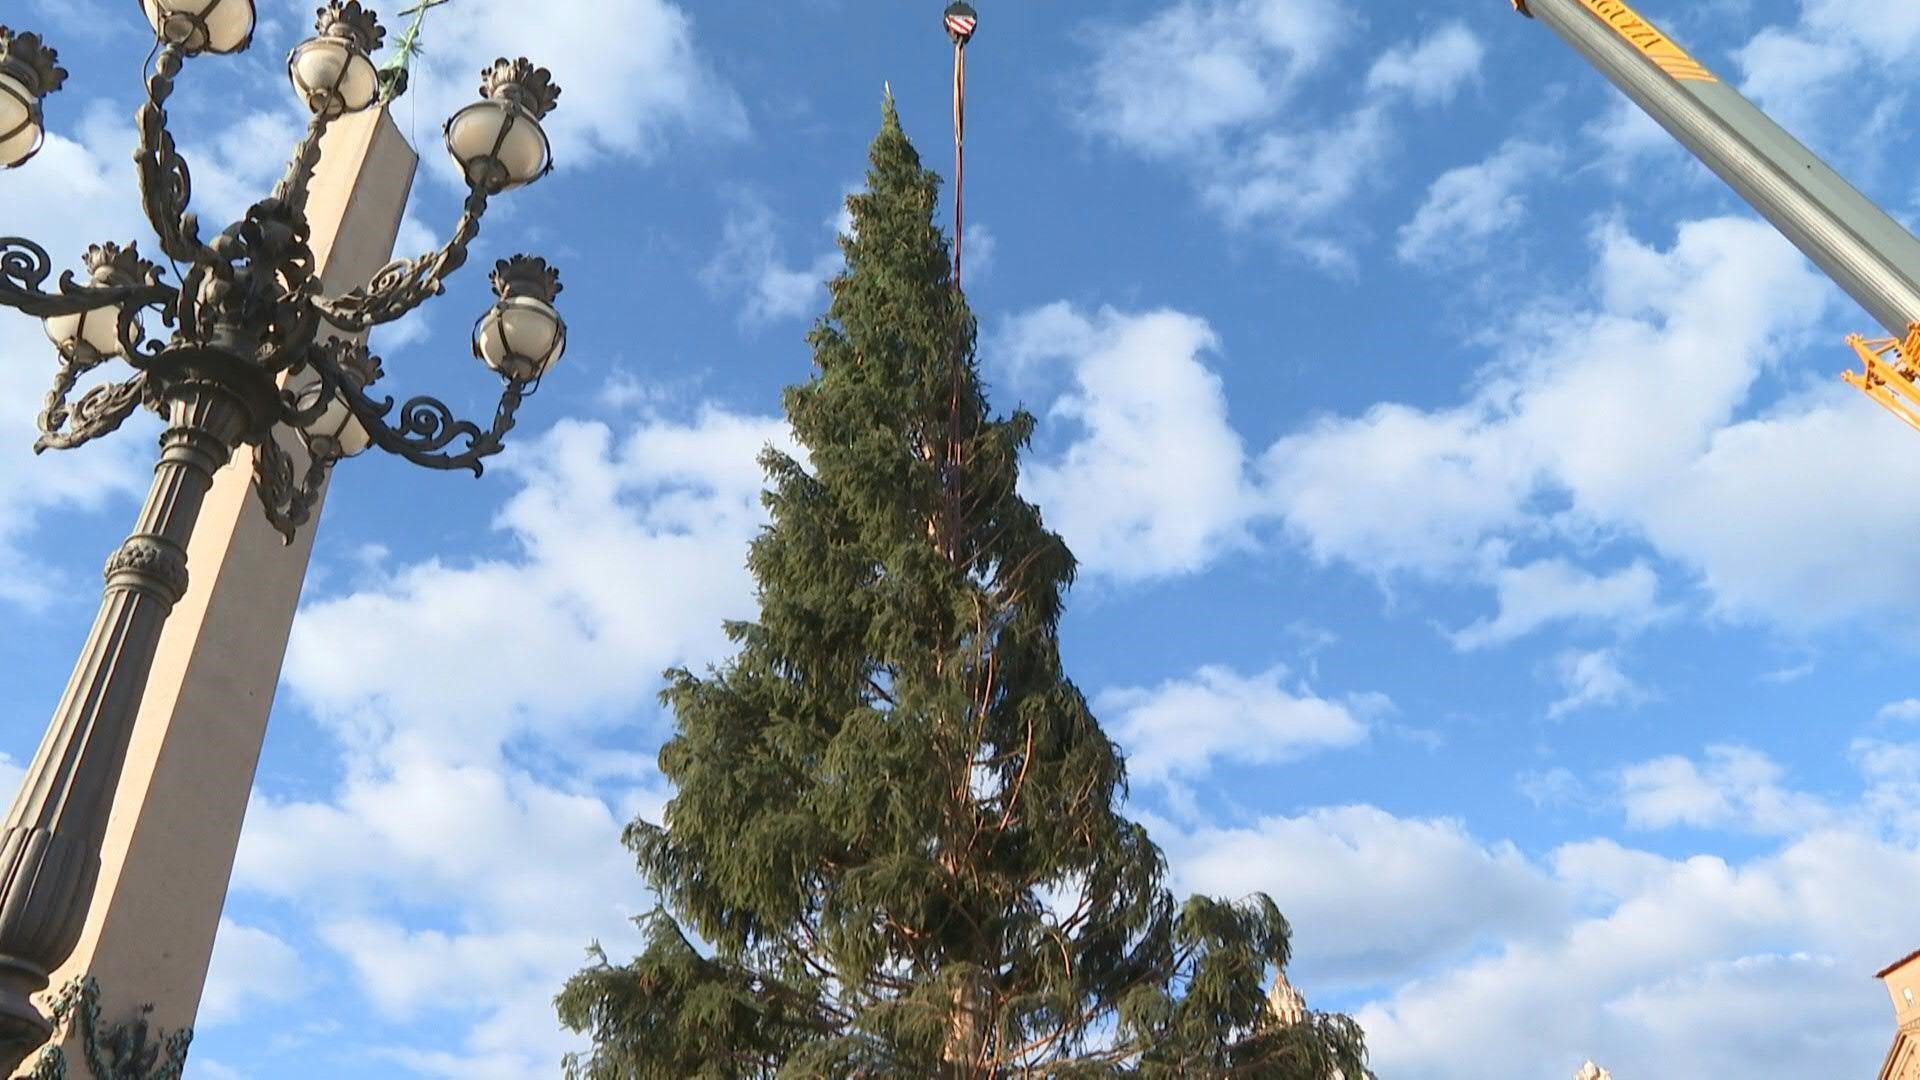 Vatican puts up Christmas tree in St. Peter's Square